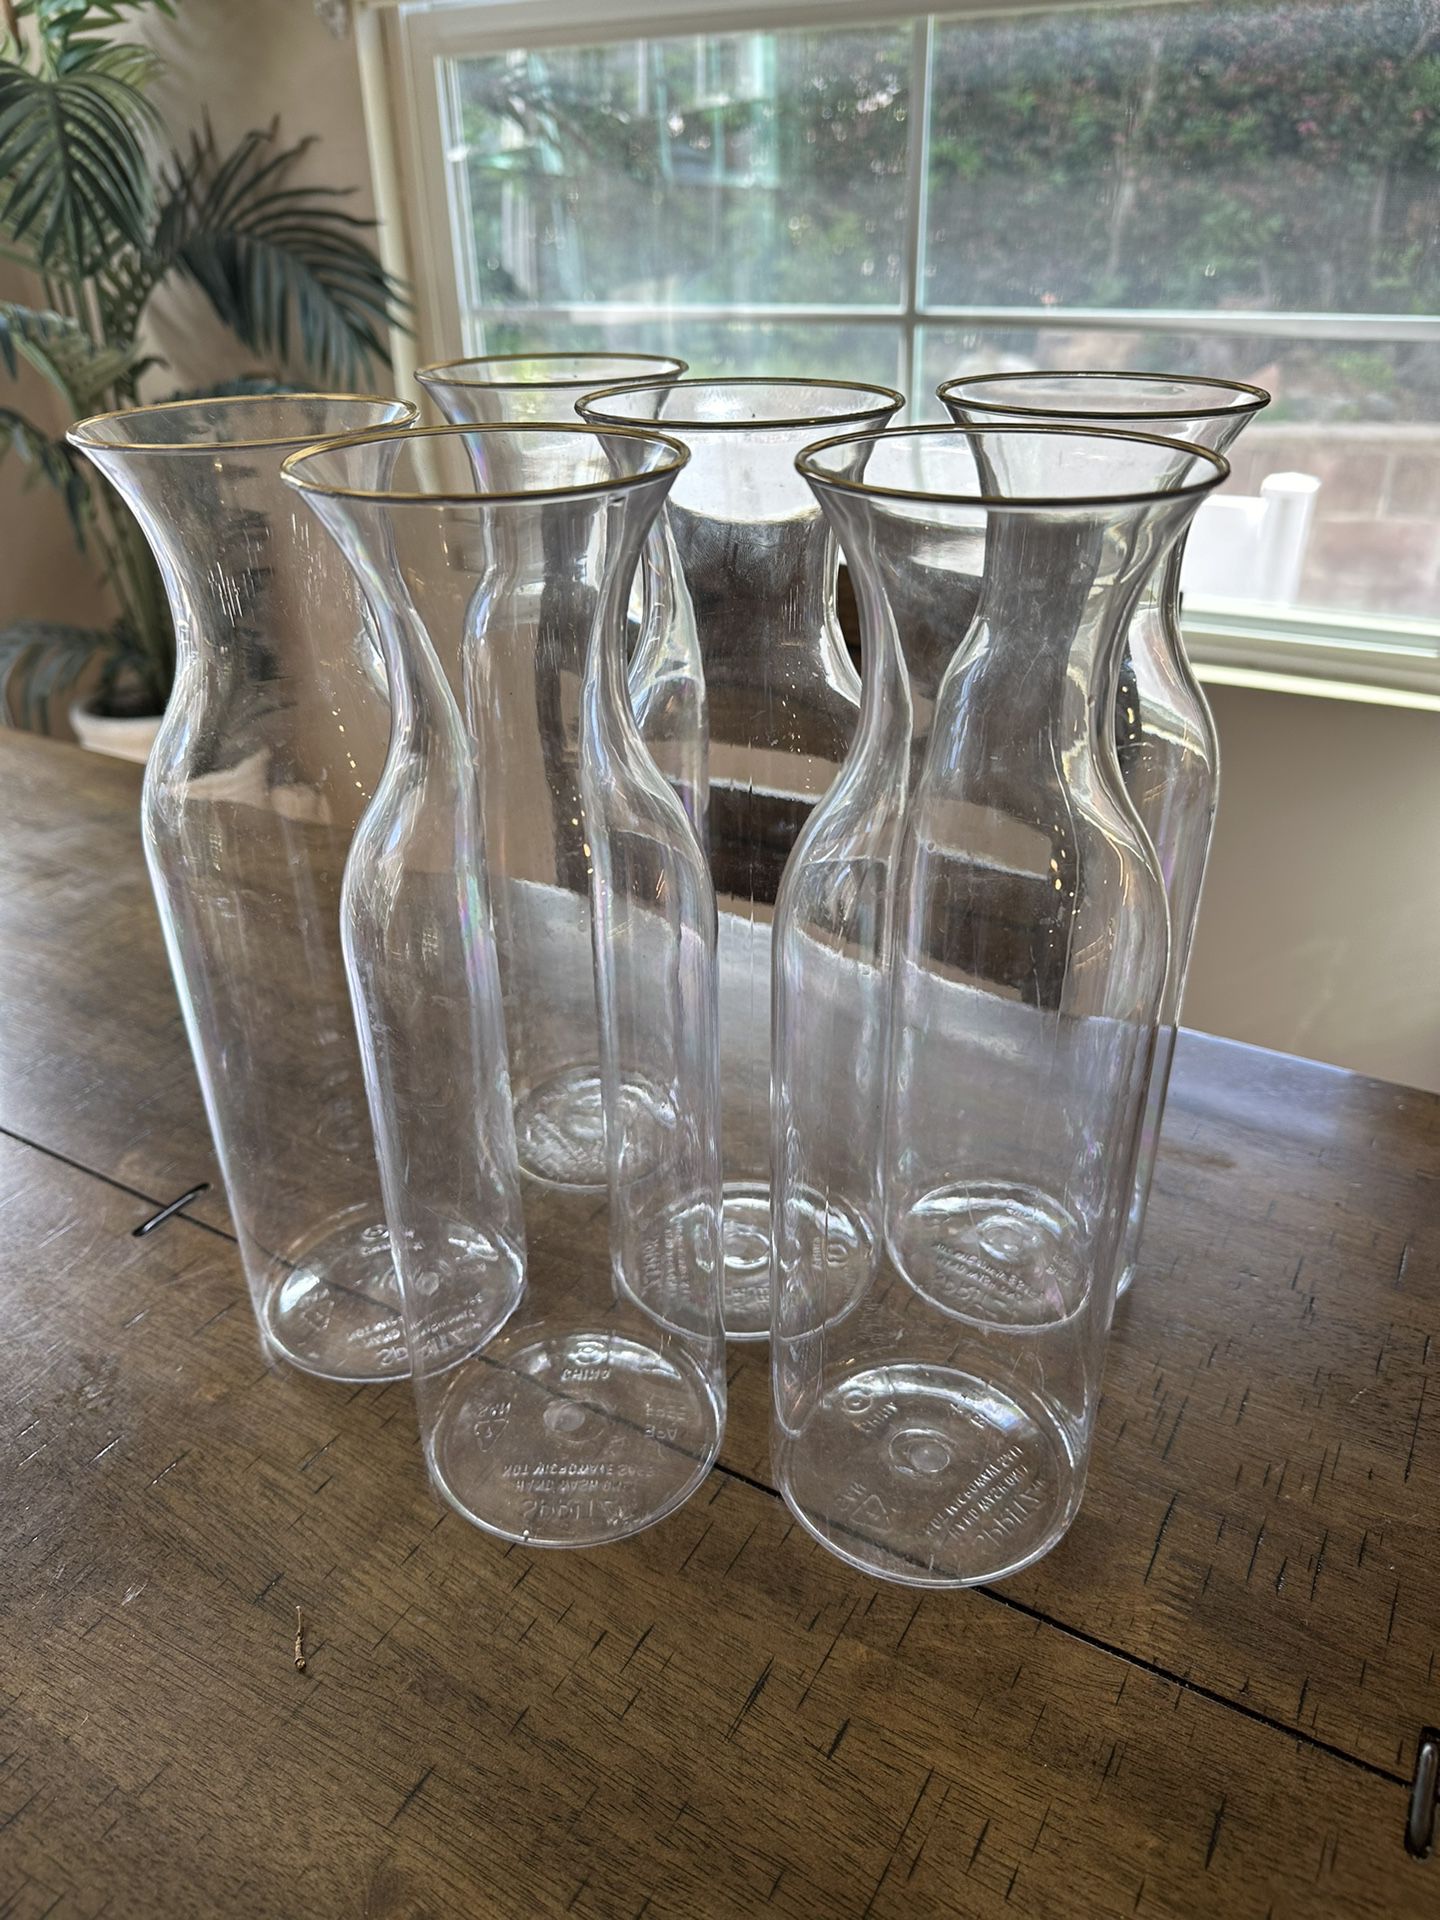 6 Acrylic Water Carafes - MUST GO